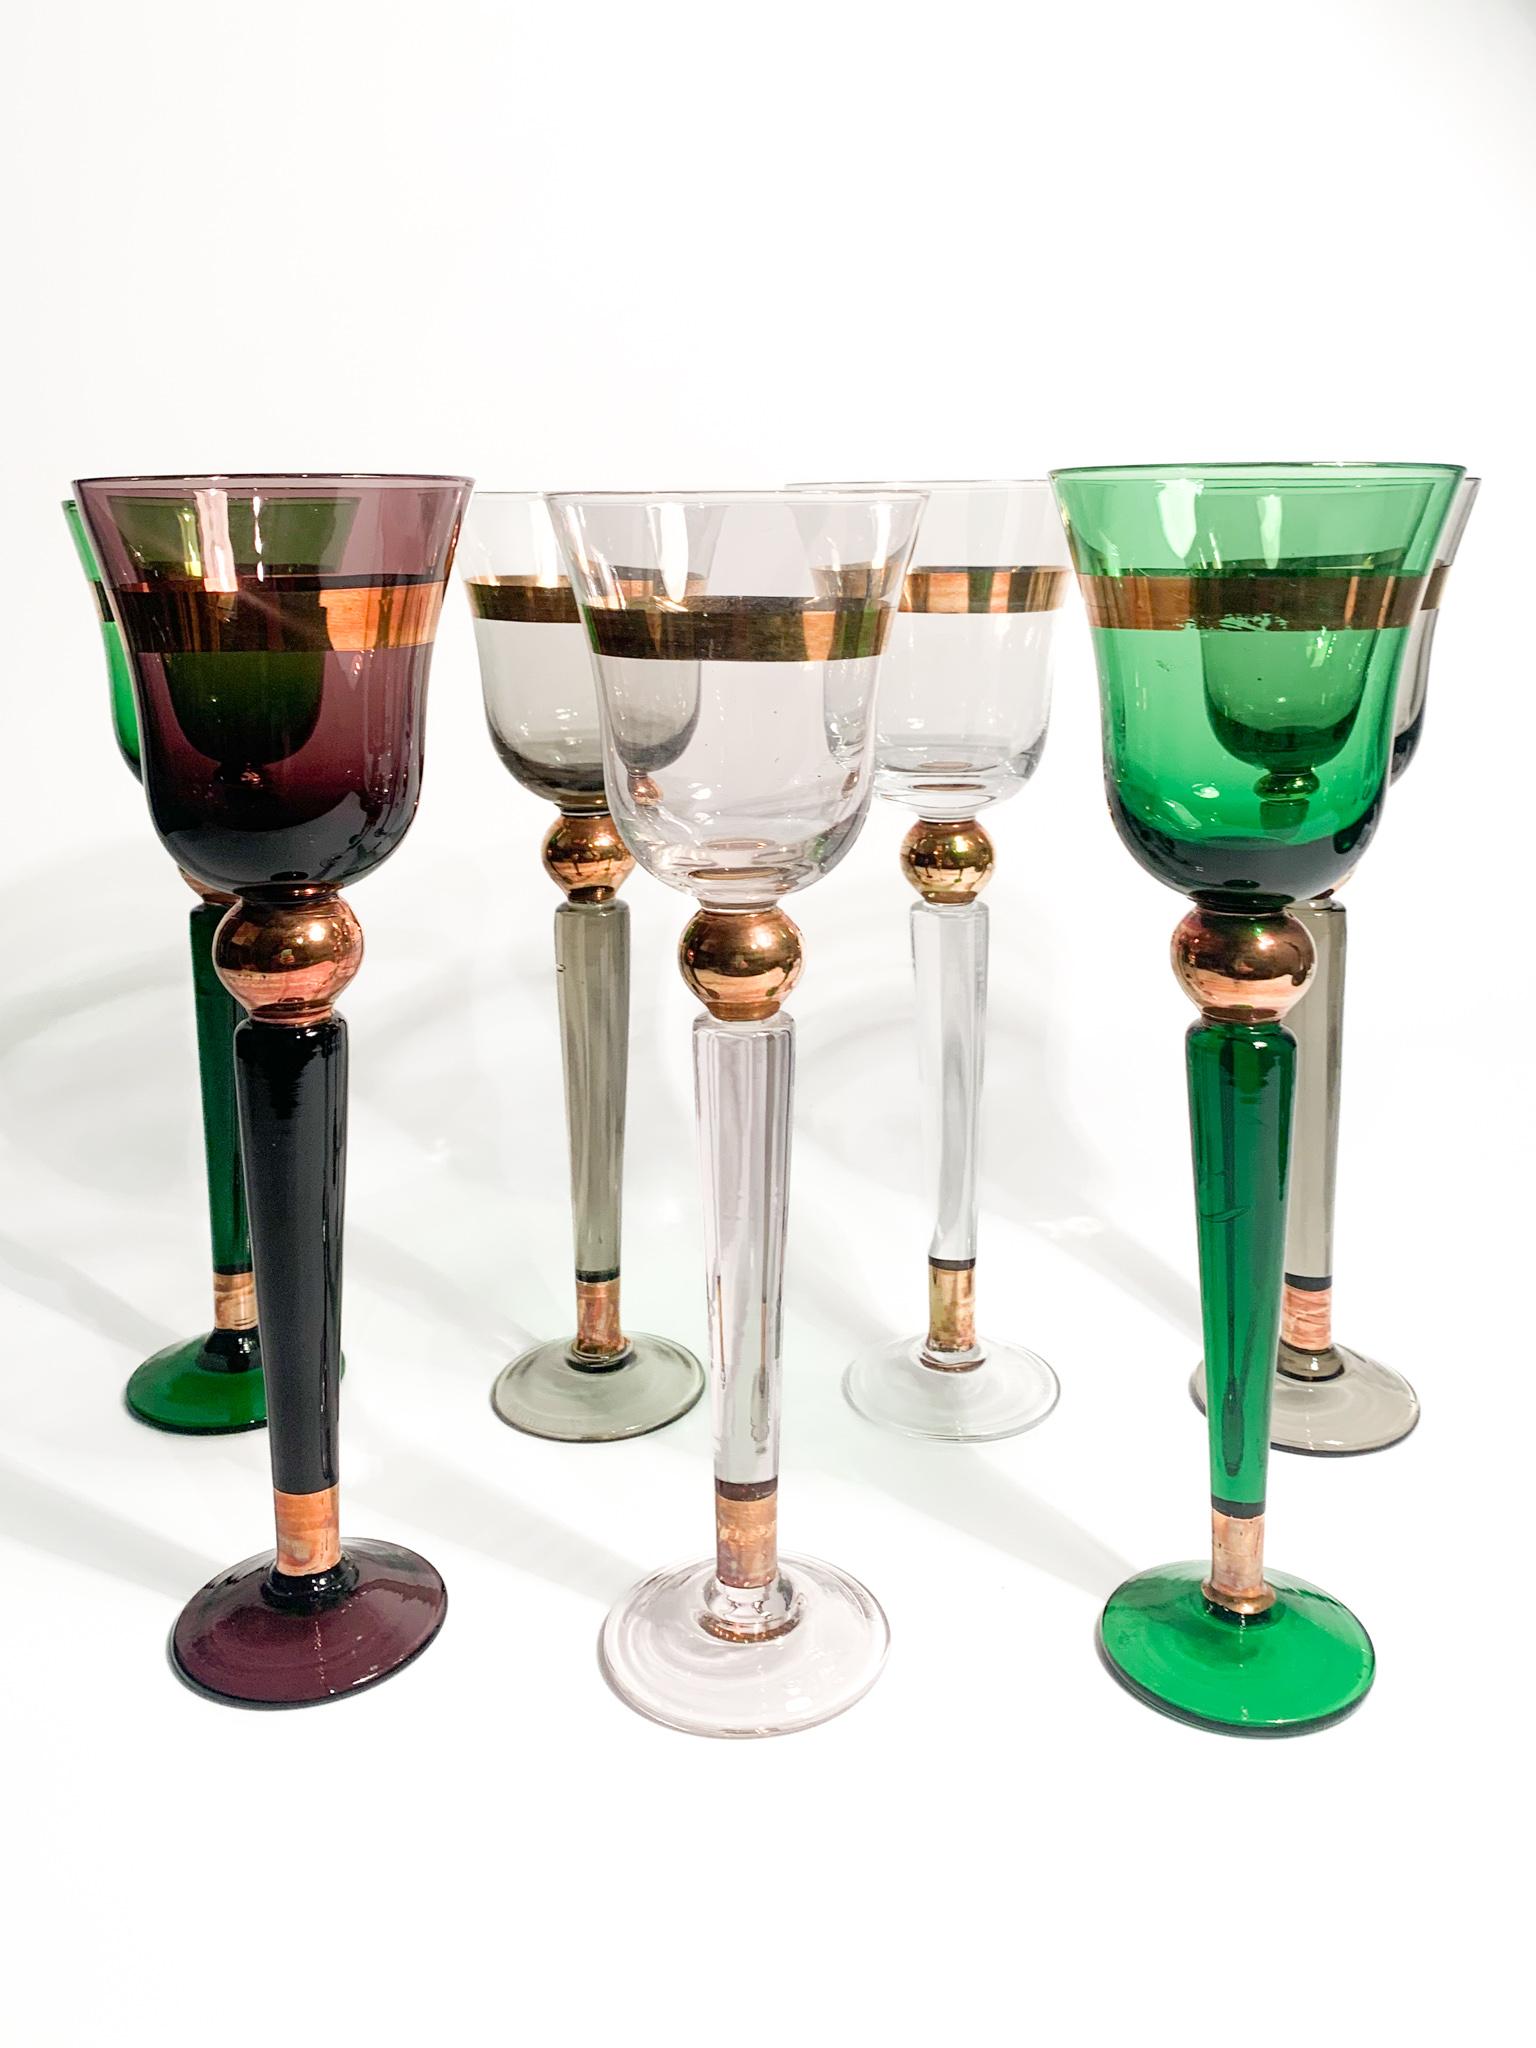 Set of six glasses (plus 1) in multicolored Murano glass, made by Venini in the 1950s. Each glass is signed at the base.

Ø 7 cm h 21.5 cm